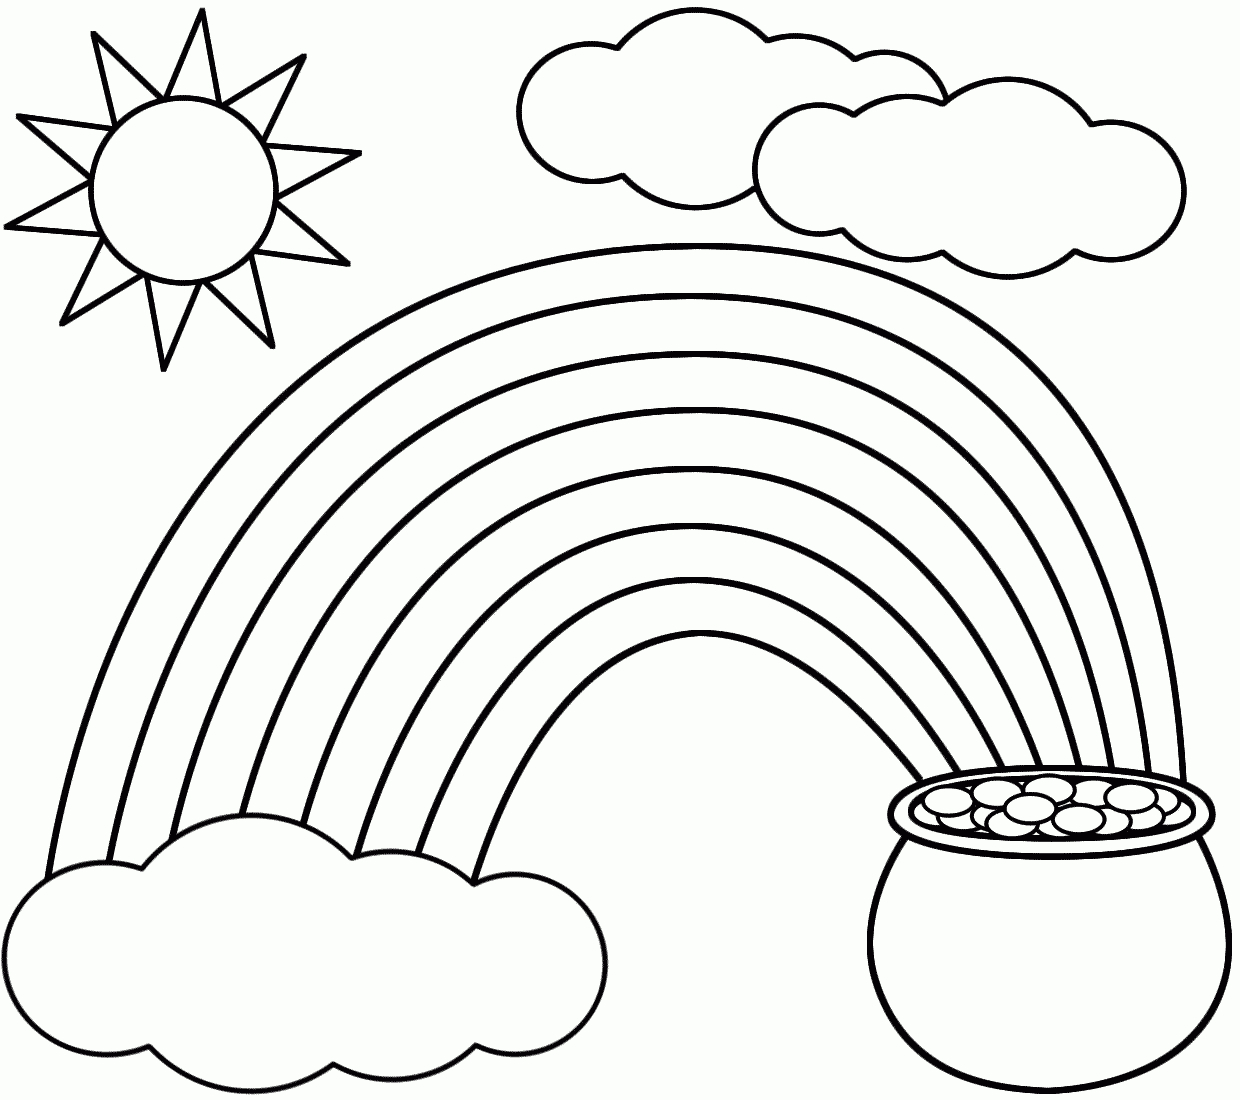 Rainbow Coloring Page ~ Kids Dream Of Rainbows With Pots Of Gold At - Free Printable Pot Of Gold Coloring Pages